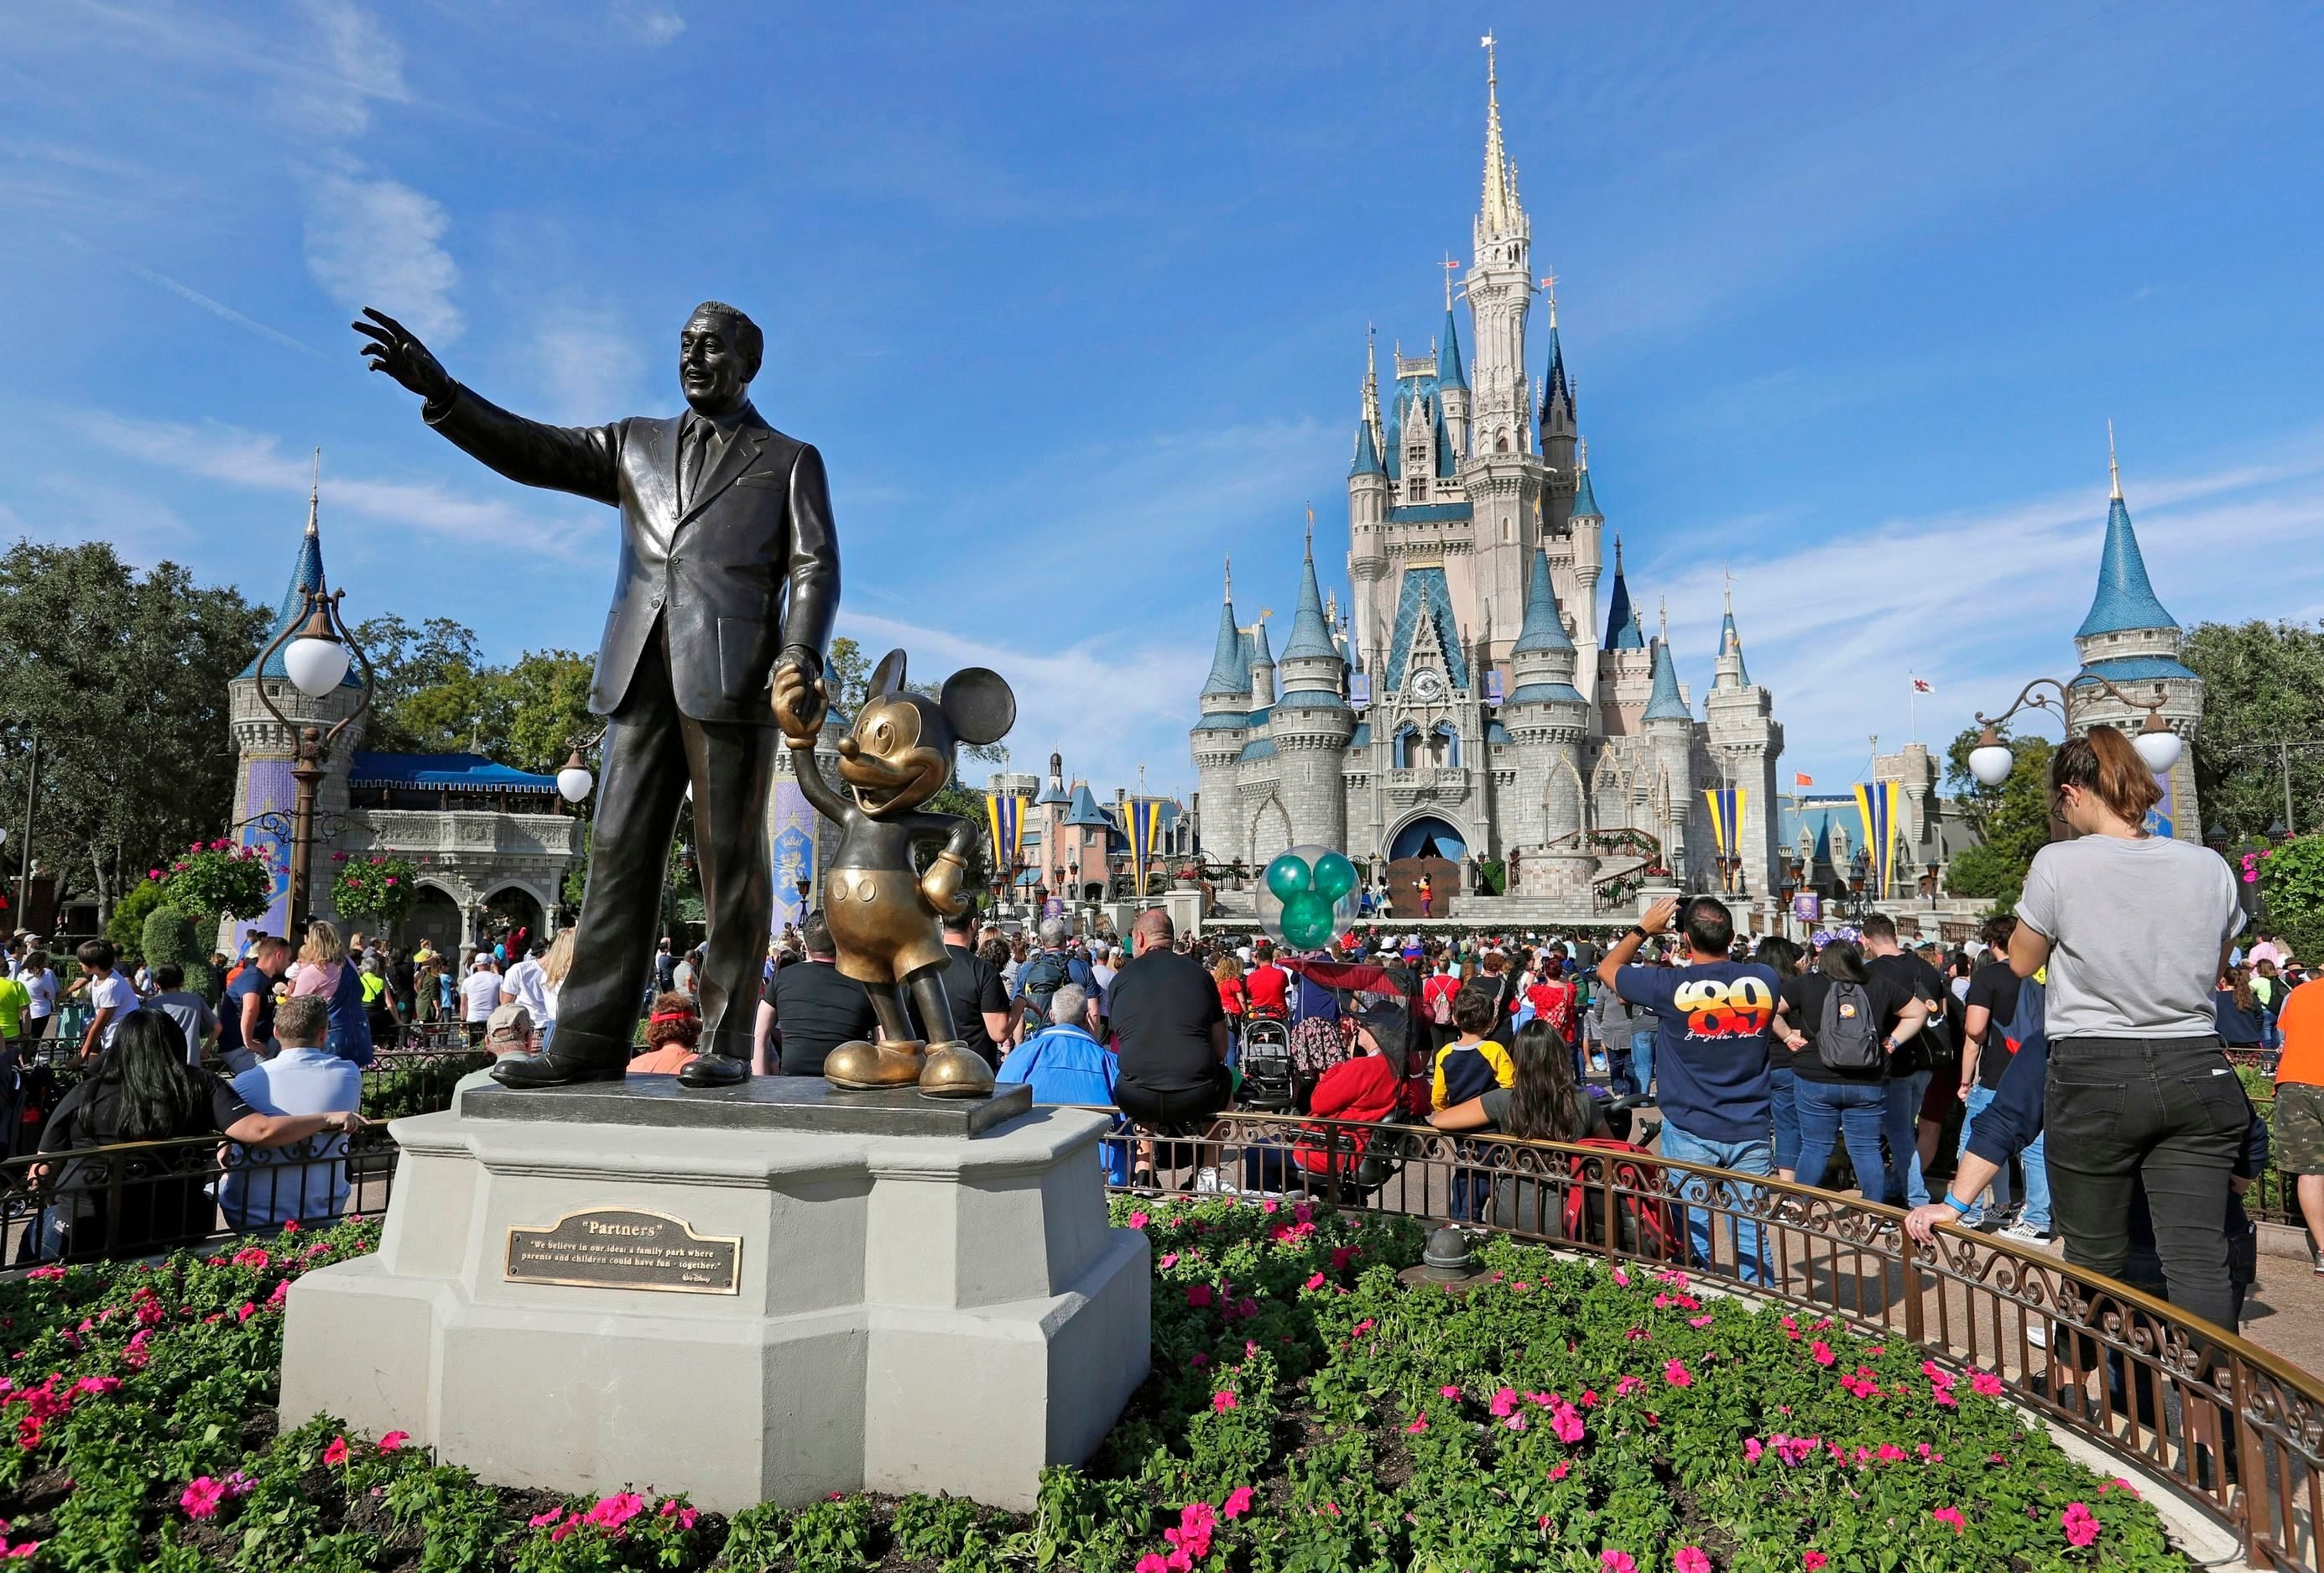 Mandatory Credit: Photo by John Raoux/AP/Shutterstock (10442147a) Guests watch a show near a statue of Walt Disney and Mickey Mouse in front of the Cinderella Castle at the Magic Kingdom at Walt Disney World in Lake Buena Vista, Fla. Disney World employees are easy targets. Tourists scream at them, sexually harass them and in the most serious cases, physically attack them, according to law enforcement reports Exchange-Disney Workers Abuse, Lake Buena Vista, USA - 09 Jan 2019